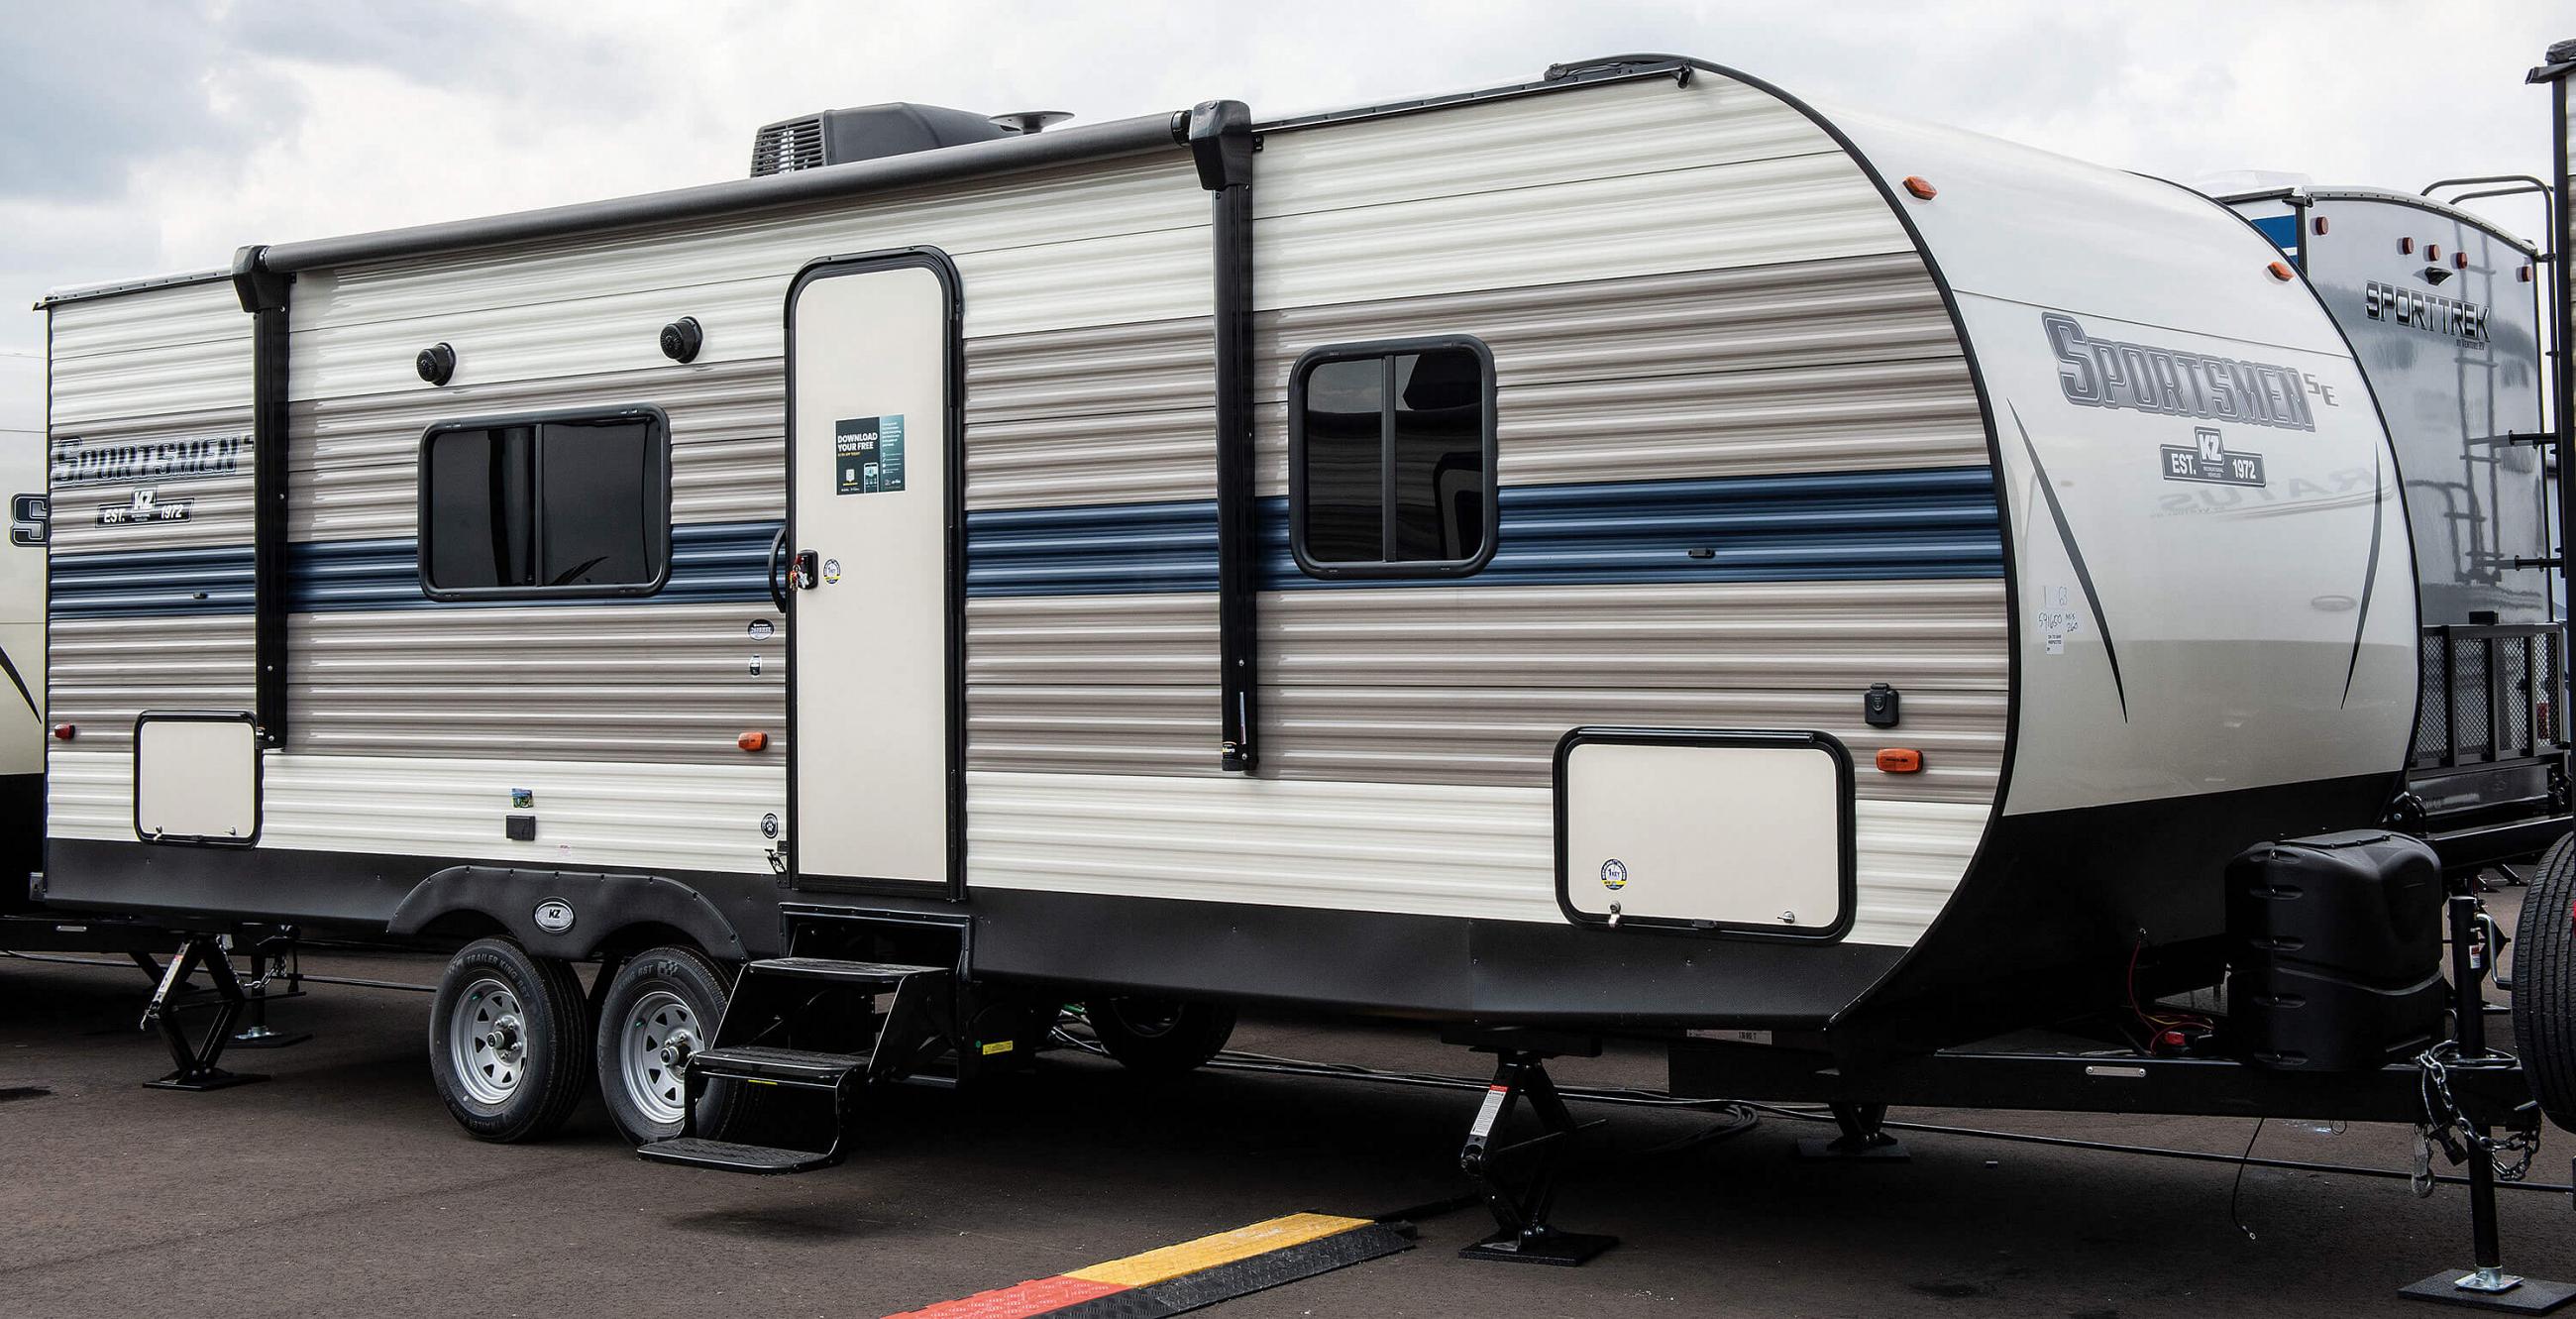 26 ft travel trailers